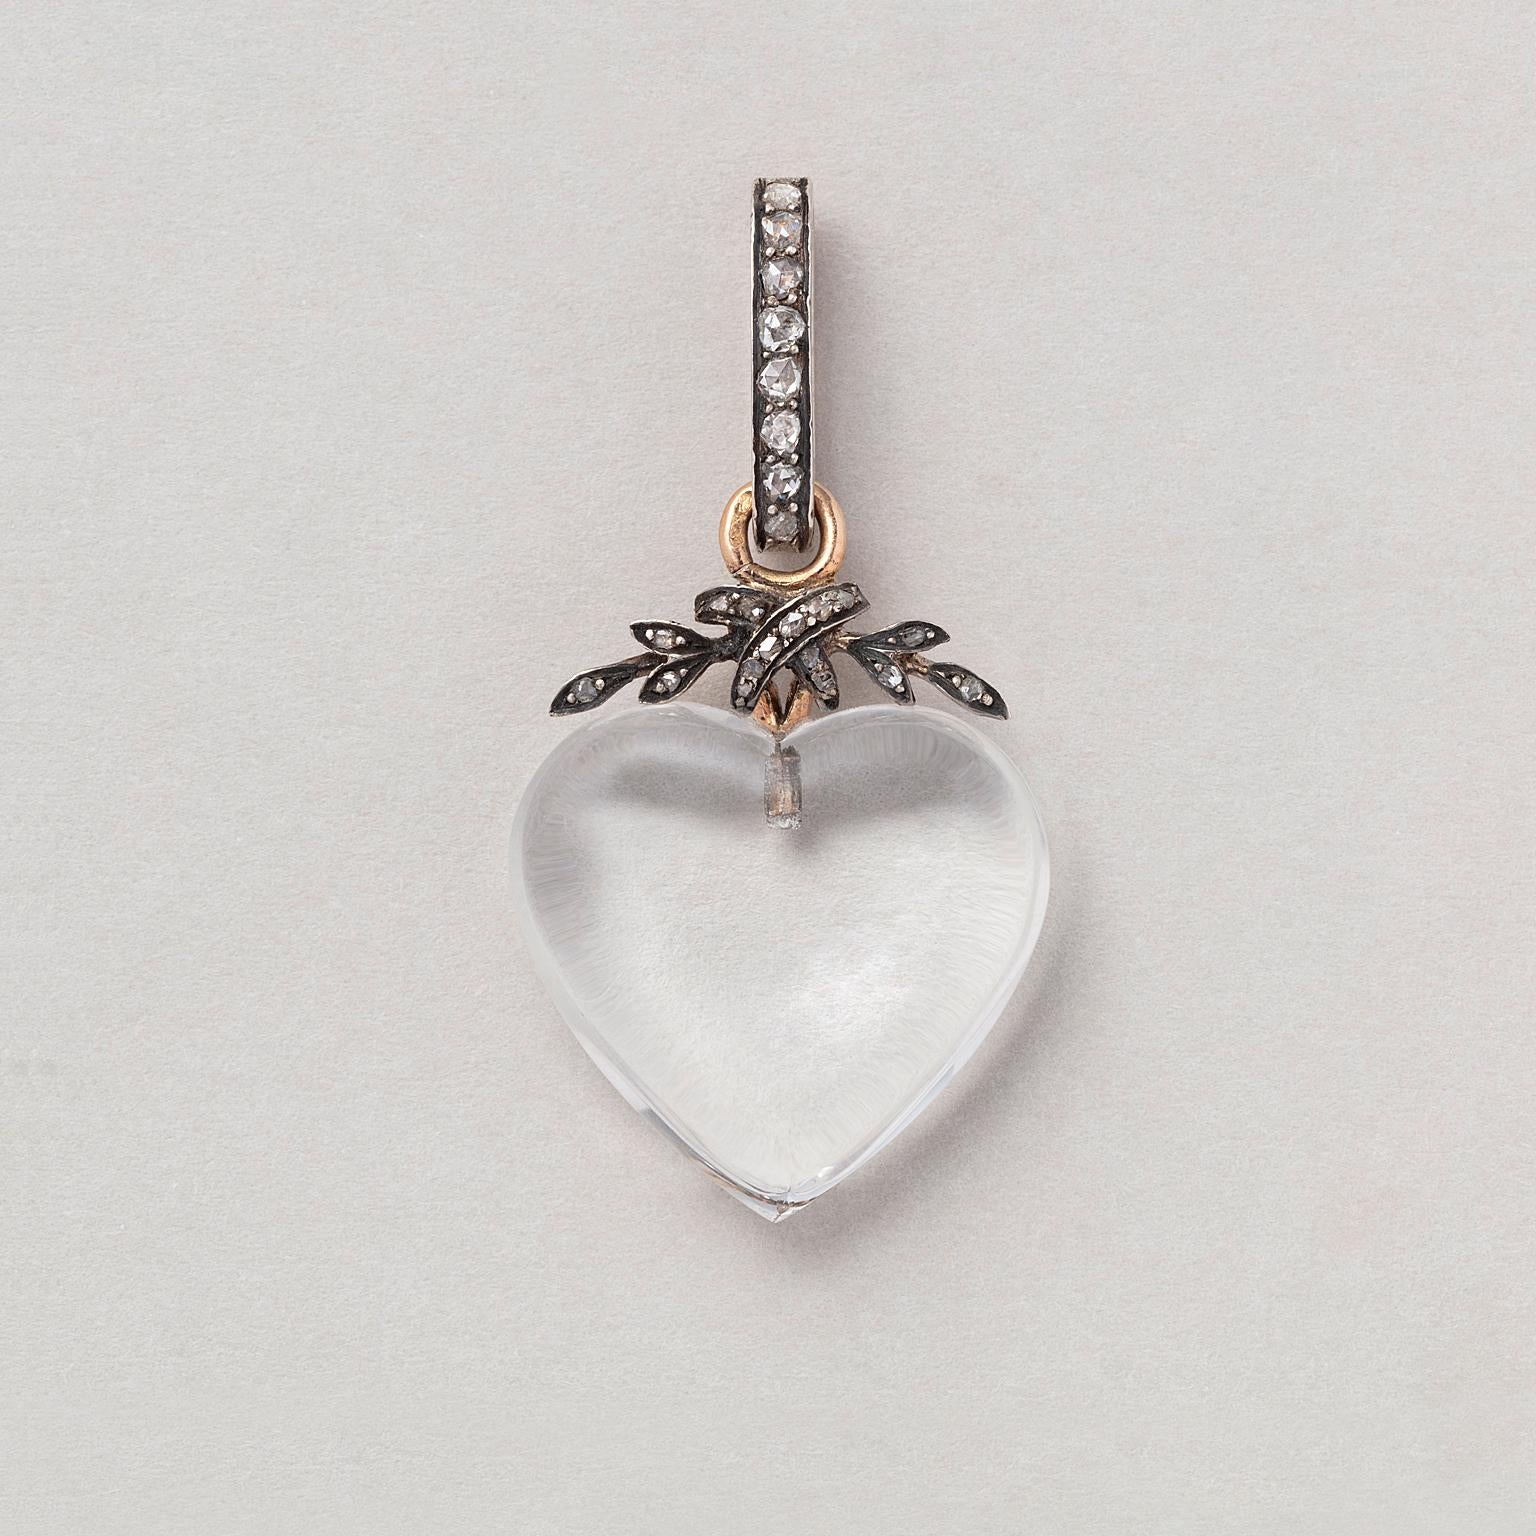 A heart-shaped rock crystal pendant with an 18-carat gold and silver laurel motif along the top of the heart and a large bail all set with rose cut diamonds (app. 0.31 carat). France, 19th century.

weight: 7.19 grams
dimensions: 4 x 2 cm
